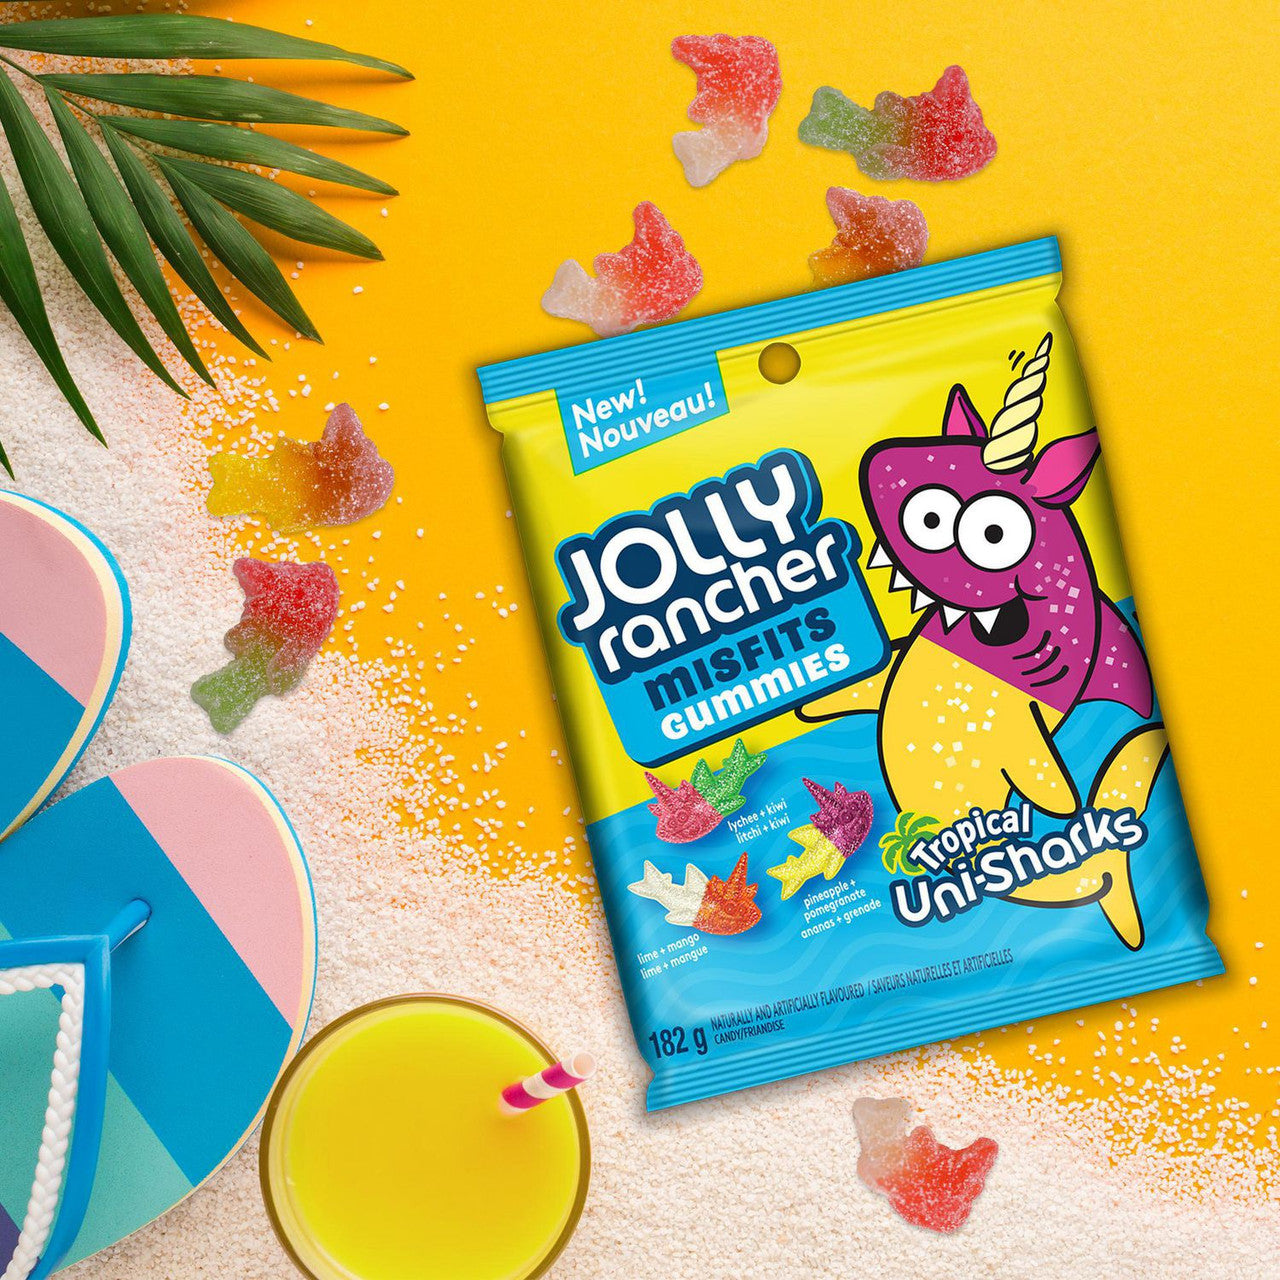 Jolly Rancher Misfits Tropical Uni,Sharks Gummy Candy, 182g/6.4 oz. Bag {Imported from Canada}